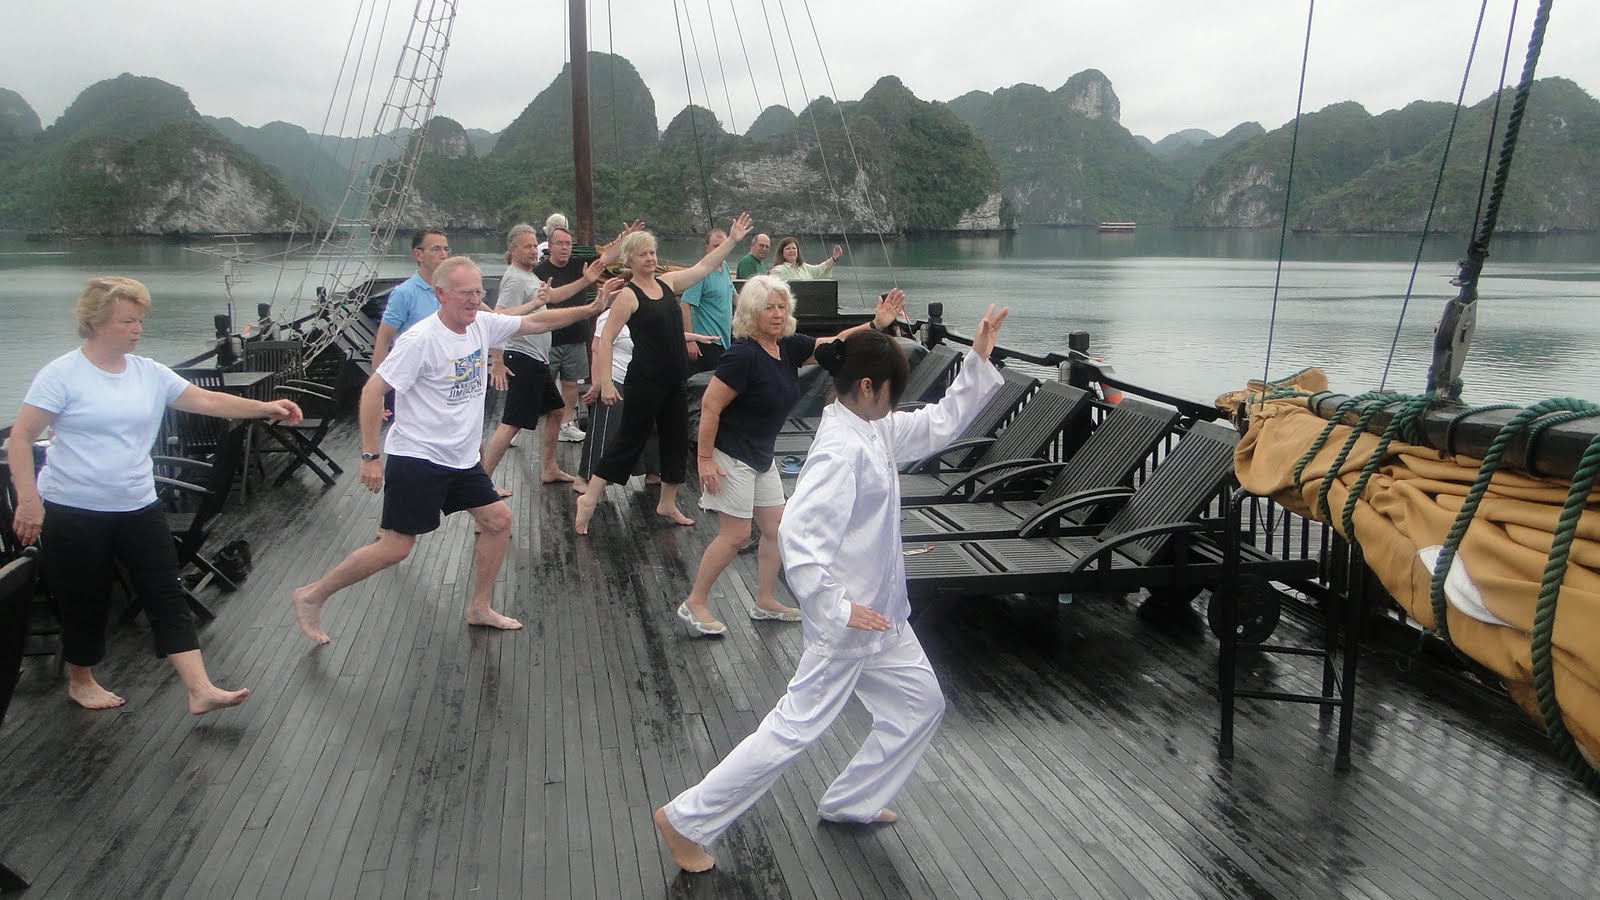 Practise Tai Chi in the morning on deck